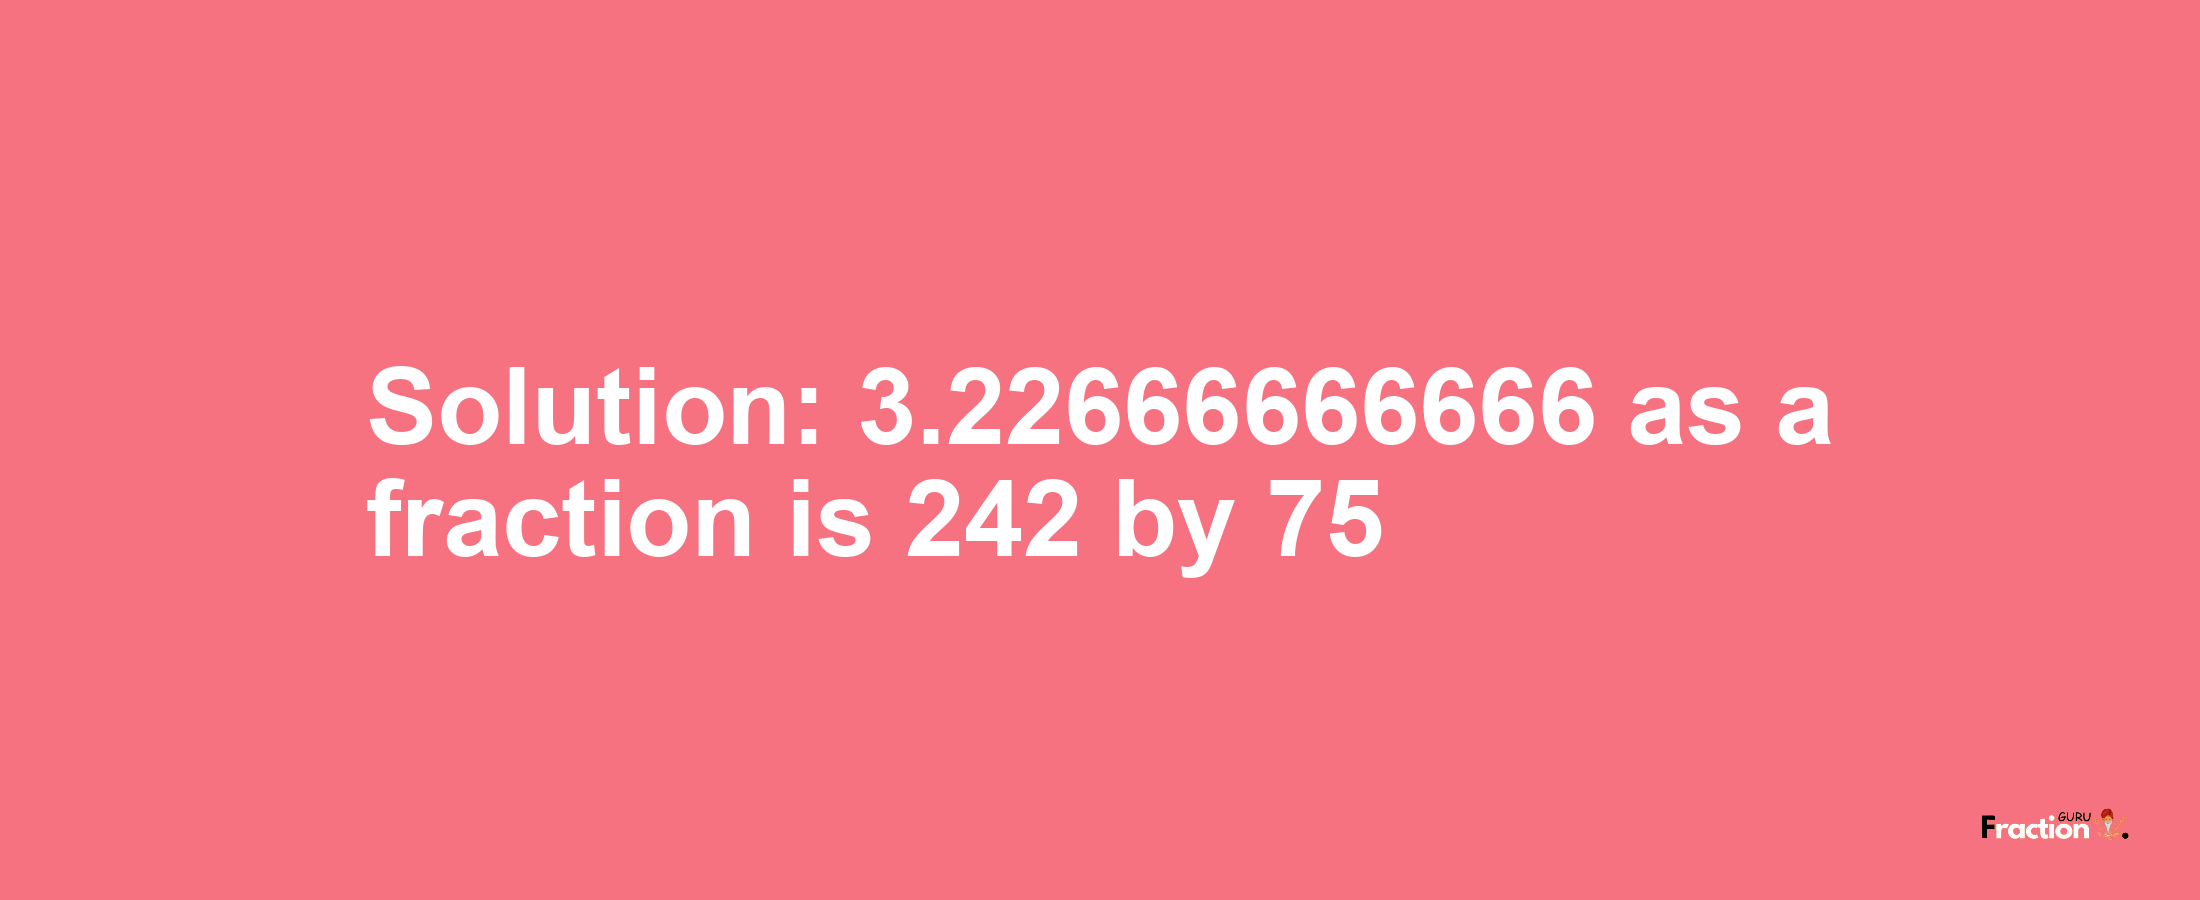 Solution:3.22666666666 as a fraction is 242/75